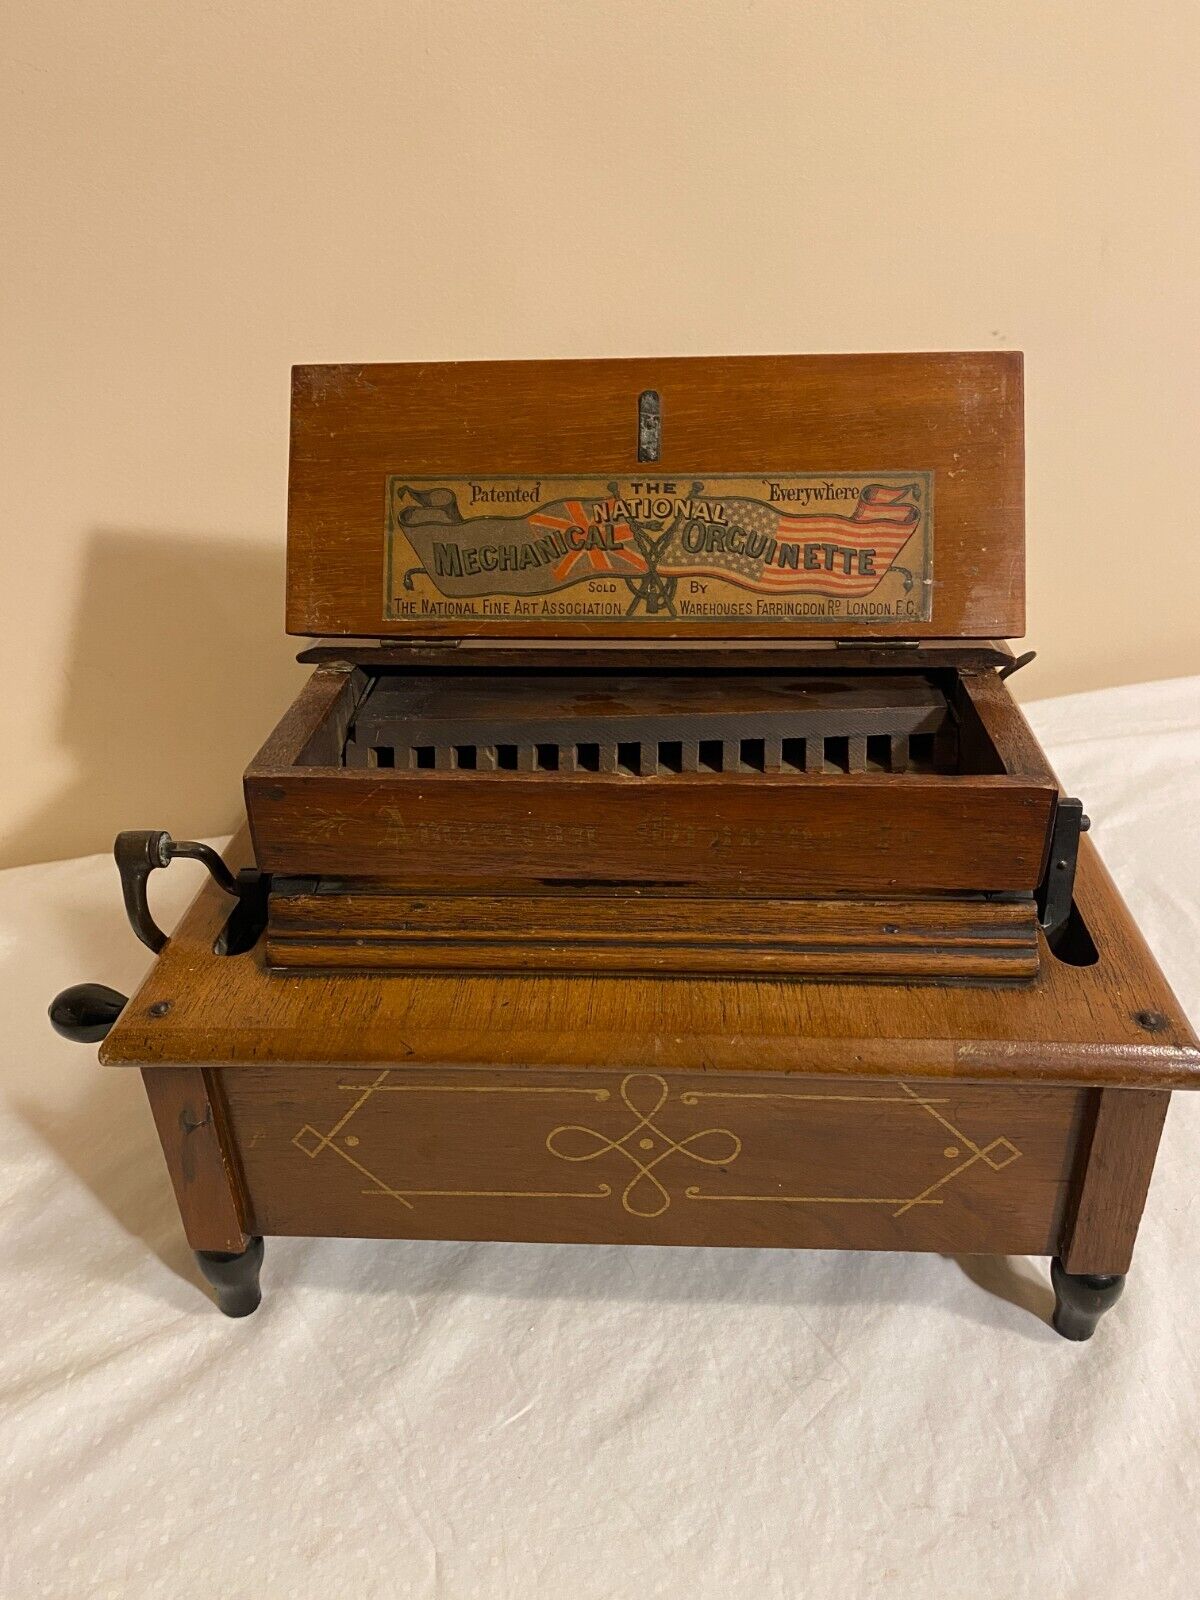 The National Mechanical Orguinette Late 19th Century Musical Scroll Device ah-25